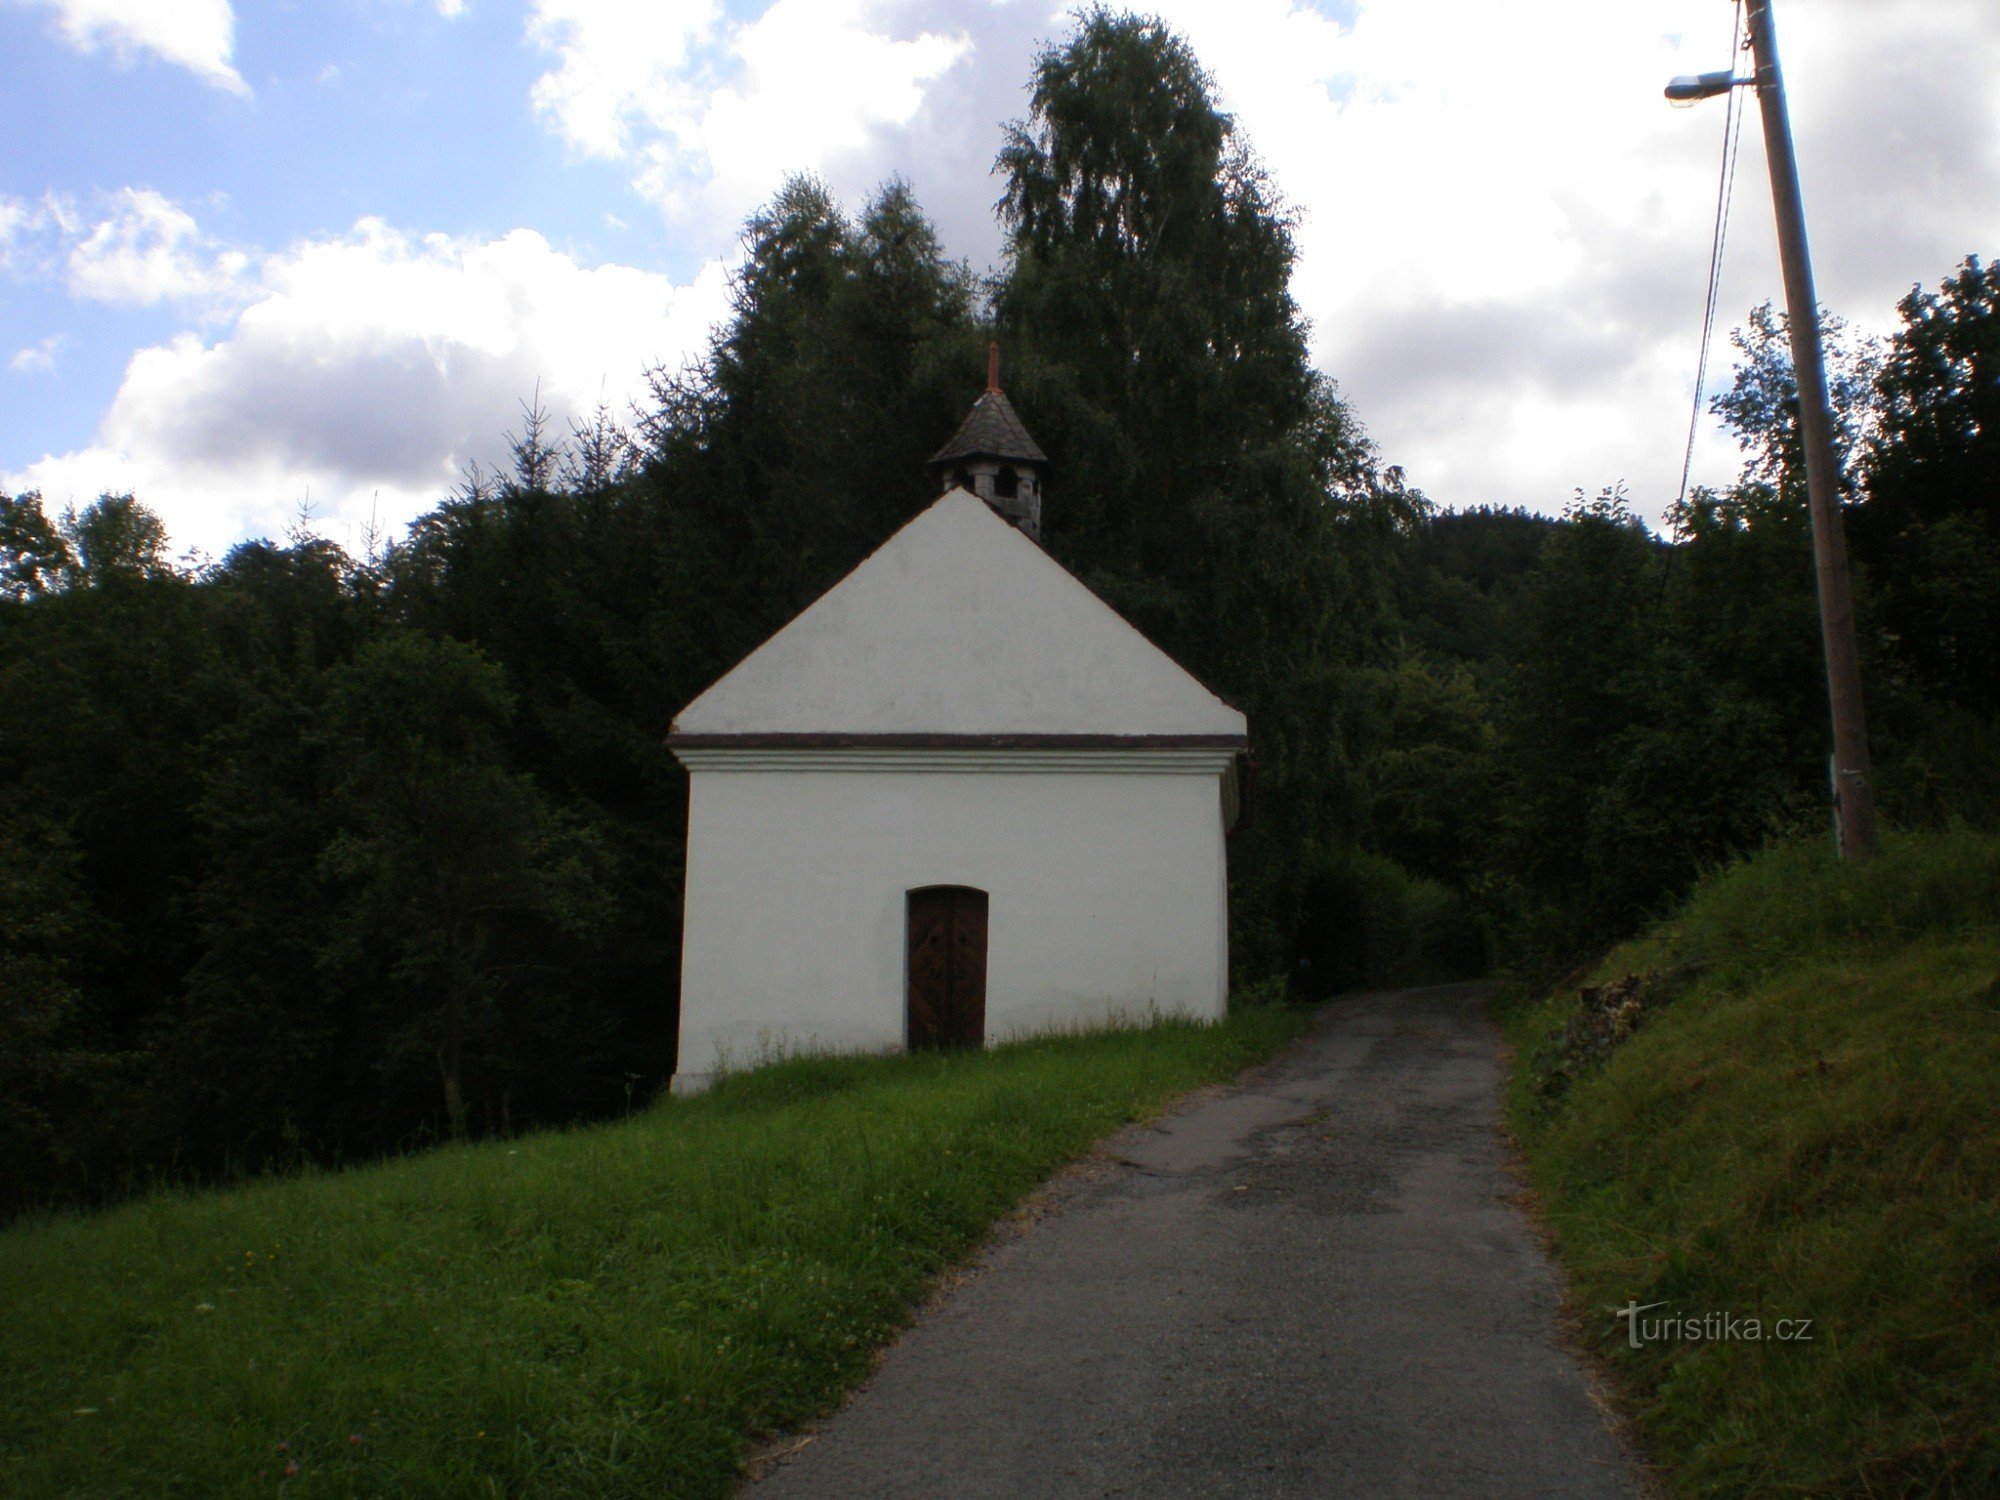 Sights of Podesní (51,5 km; cycle route)